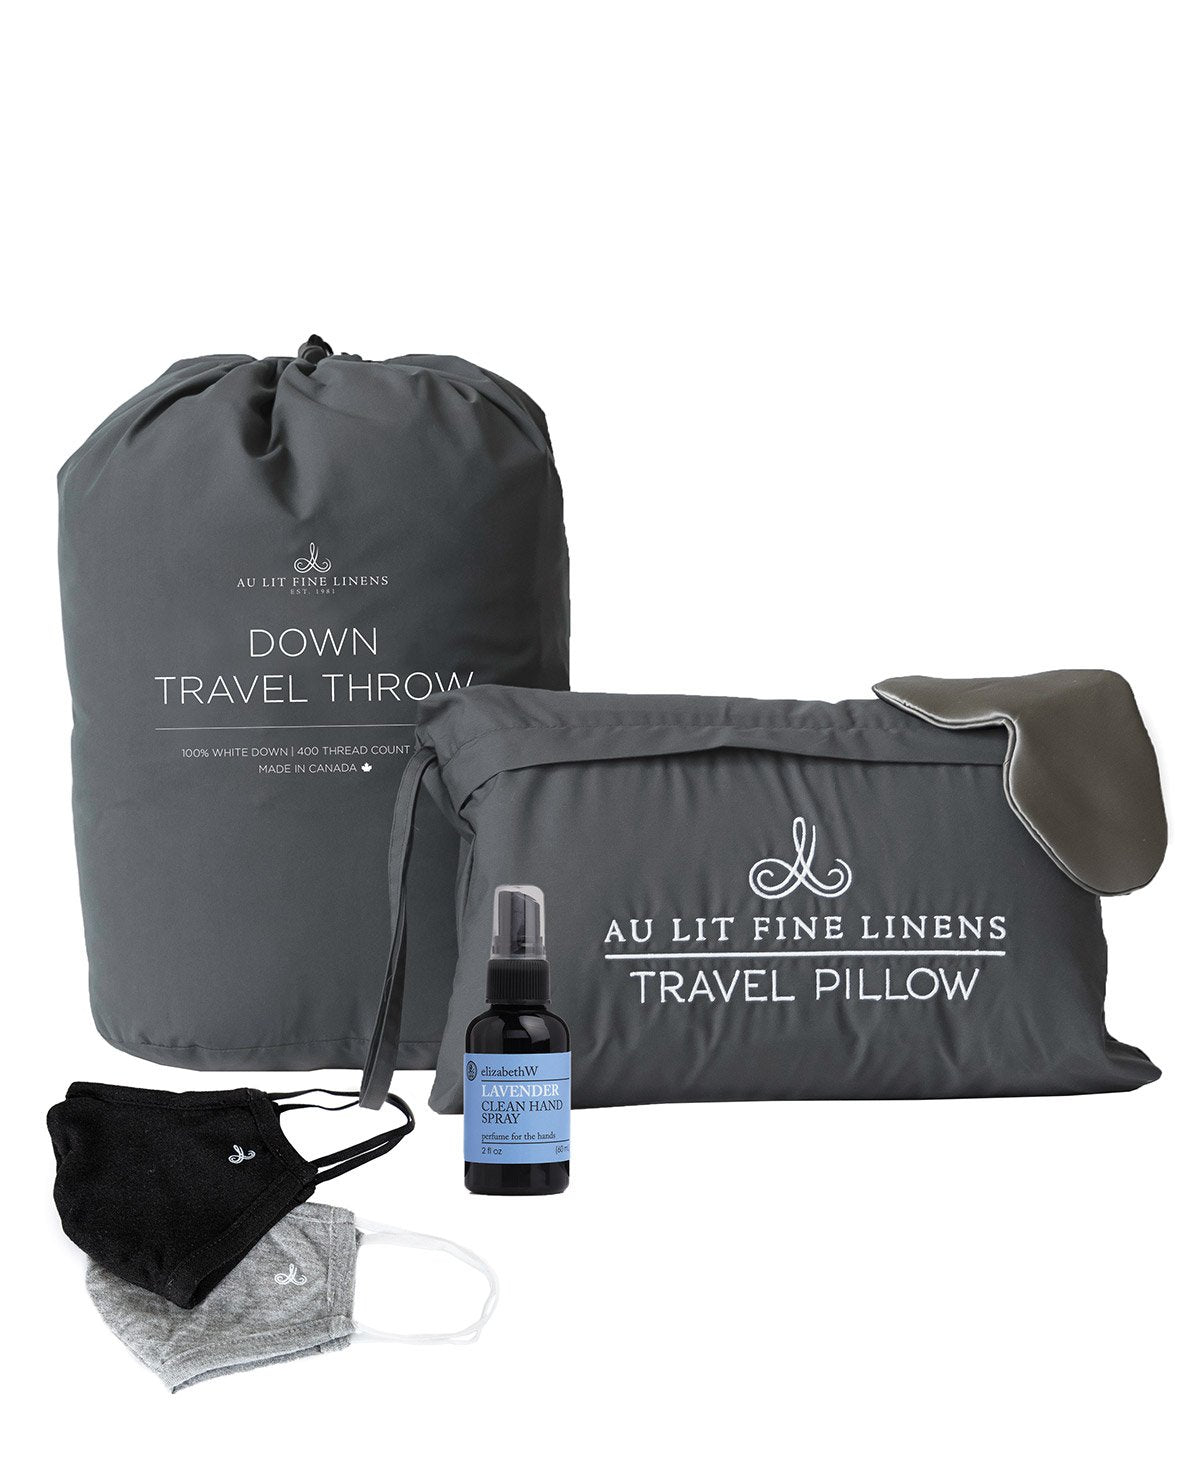 Au Lit Holiday Gift Guide: For the Travel Lover